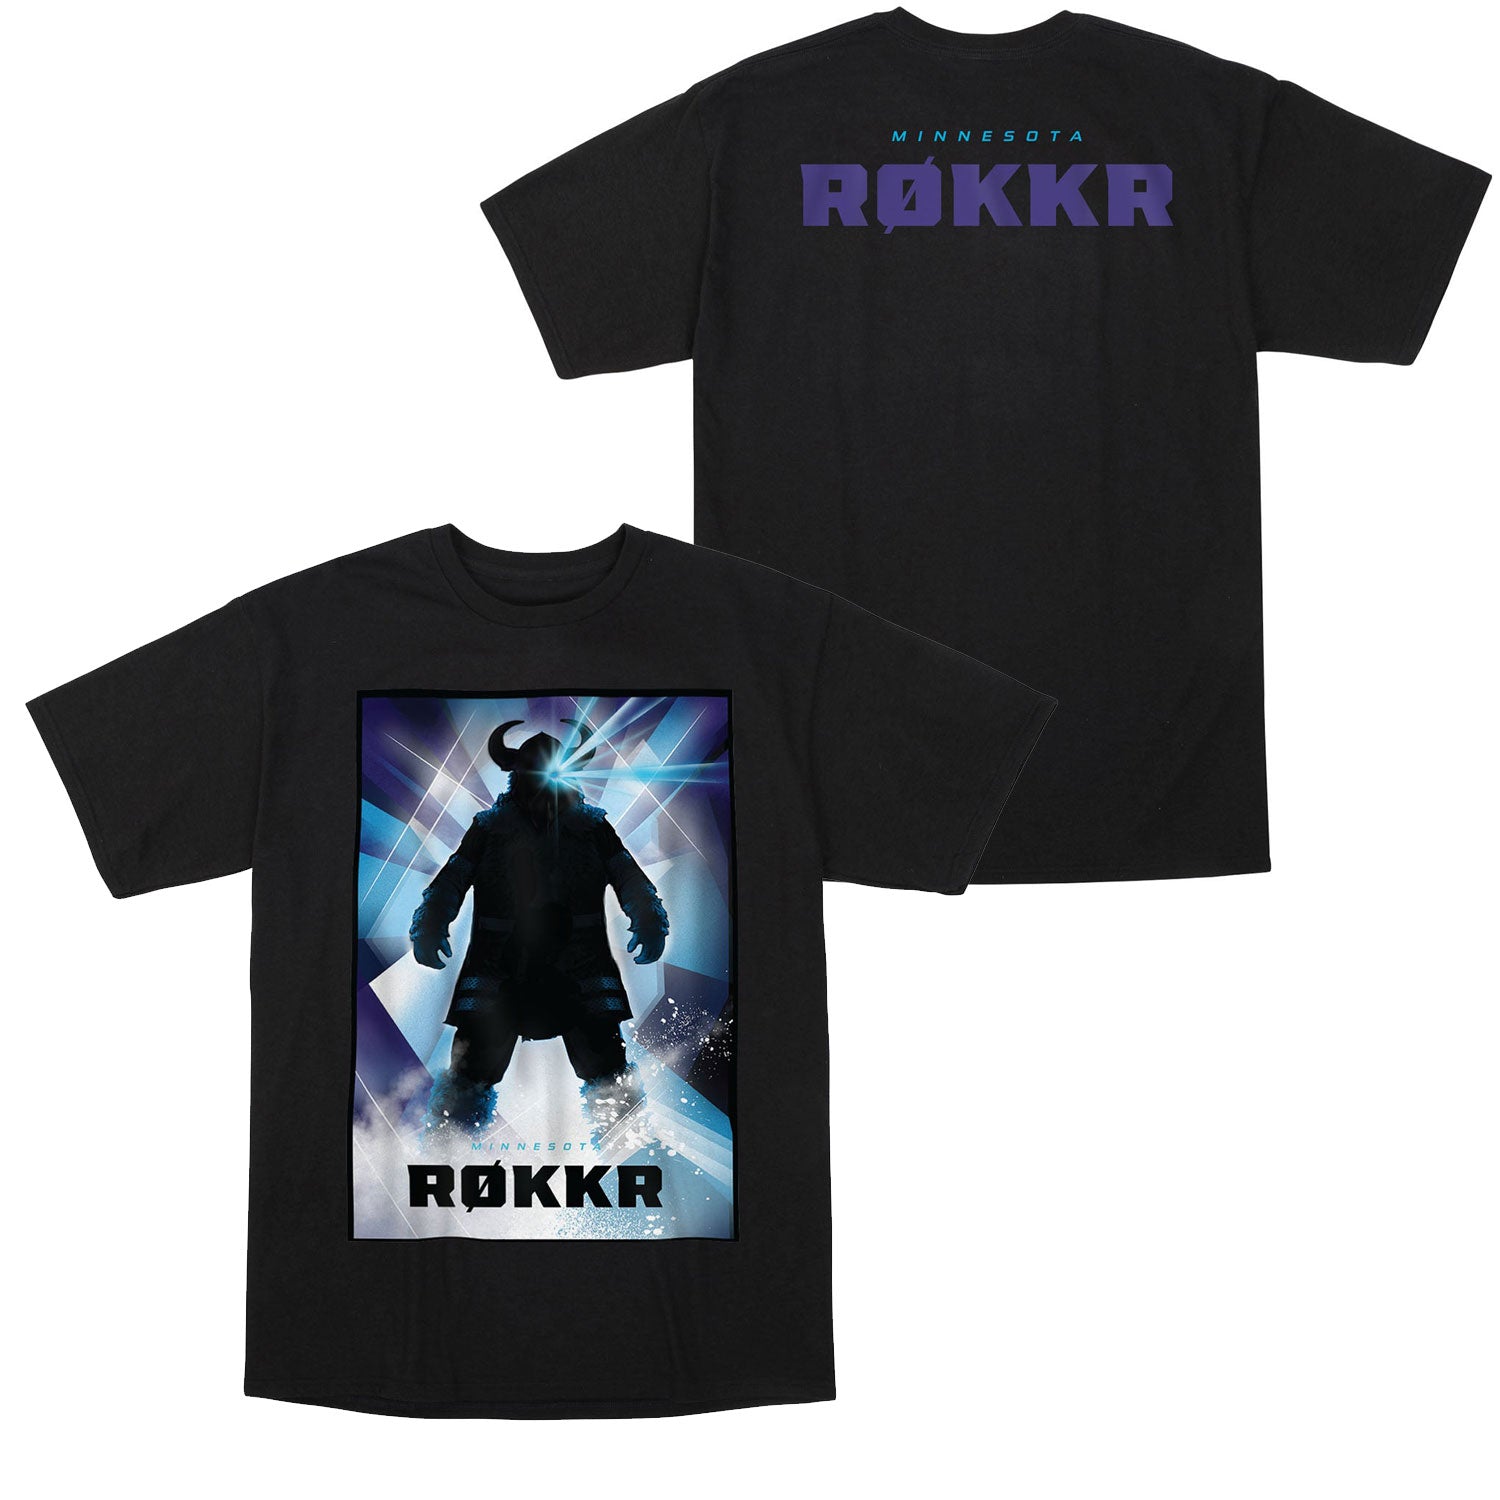 Minnesota Rokkr Native Black T-Shirt - Front and Back View